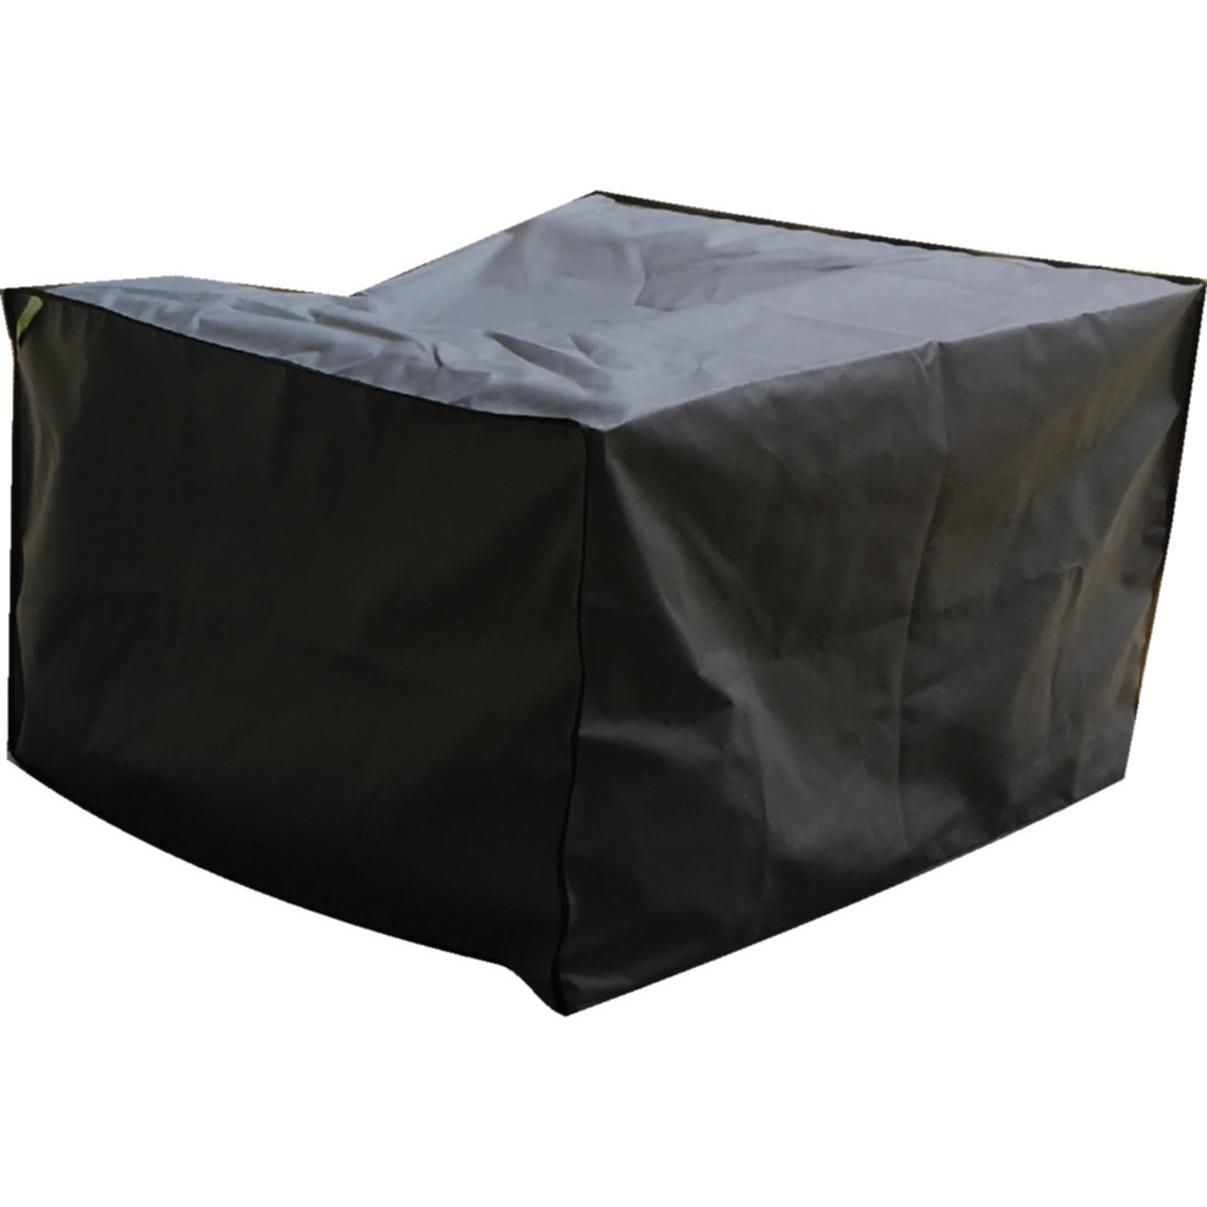 Patio Solution Covers Armchair Cover (Charcoal)